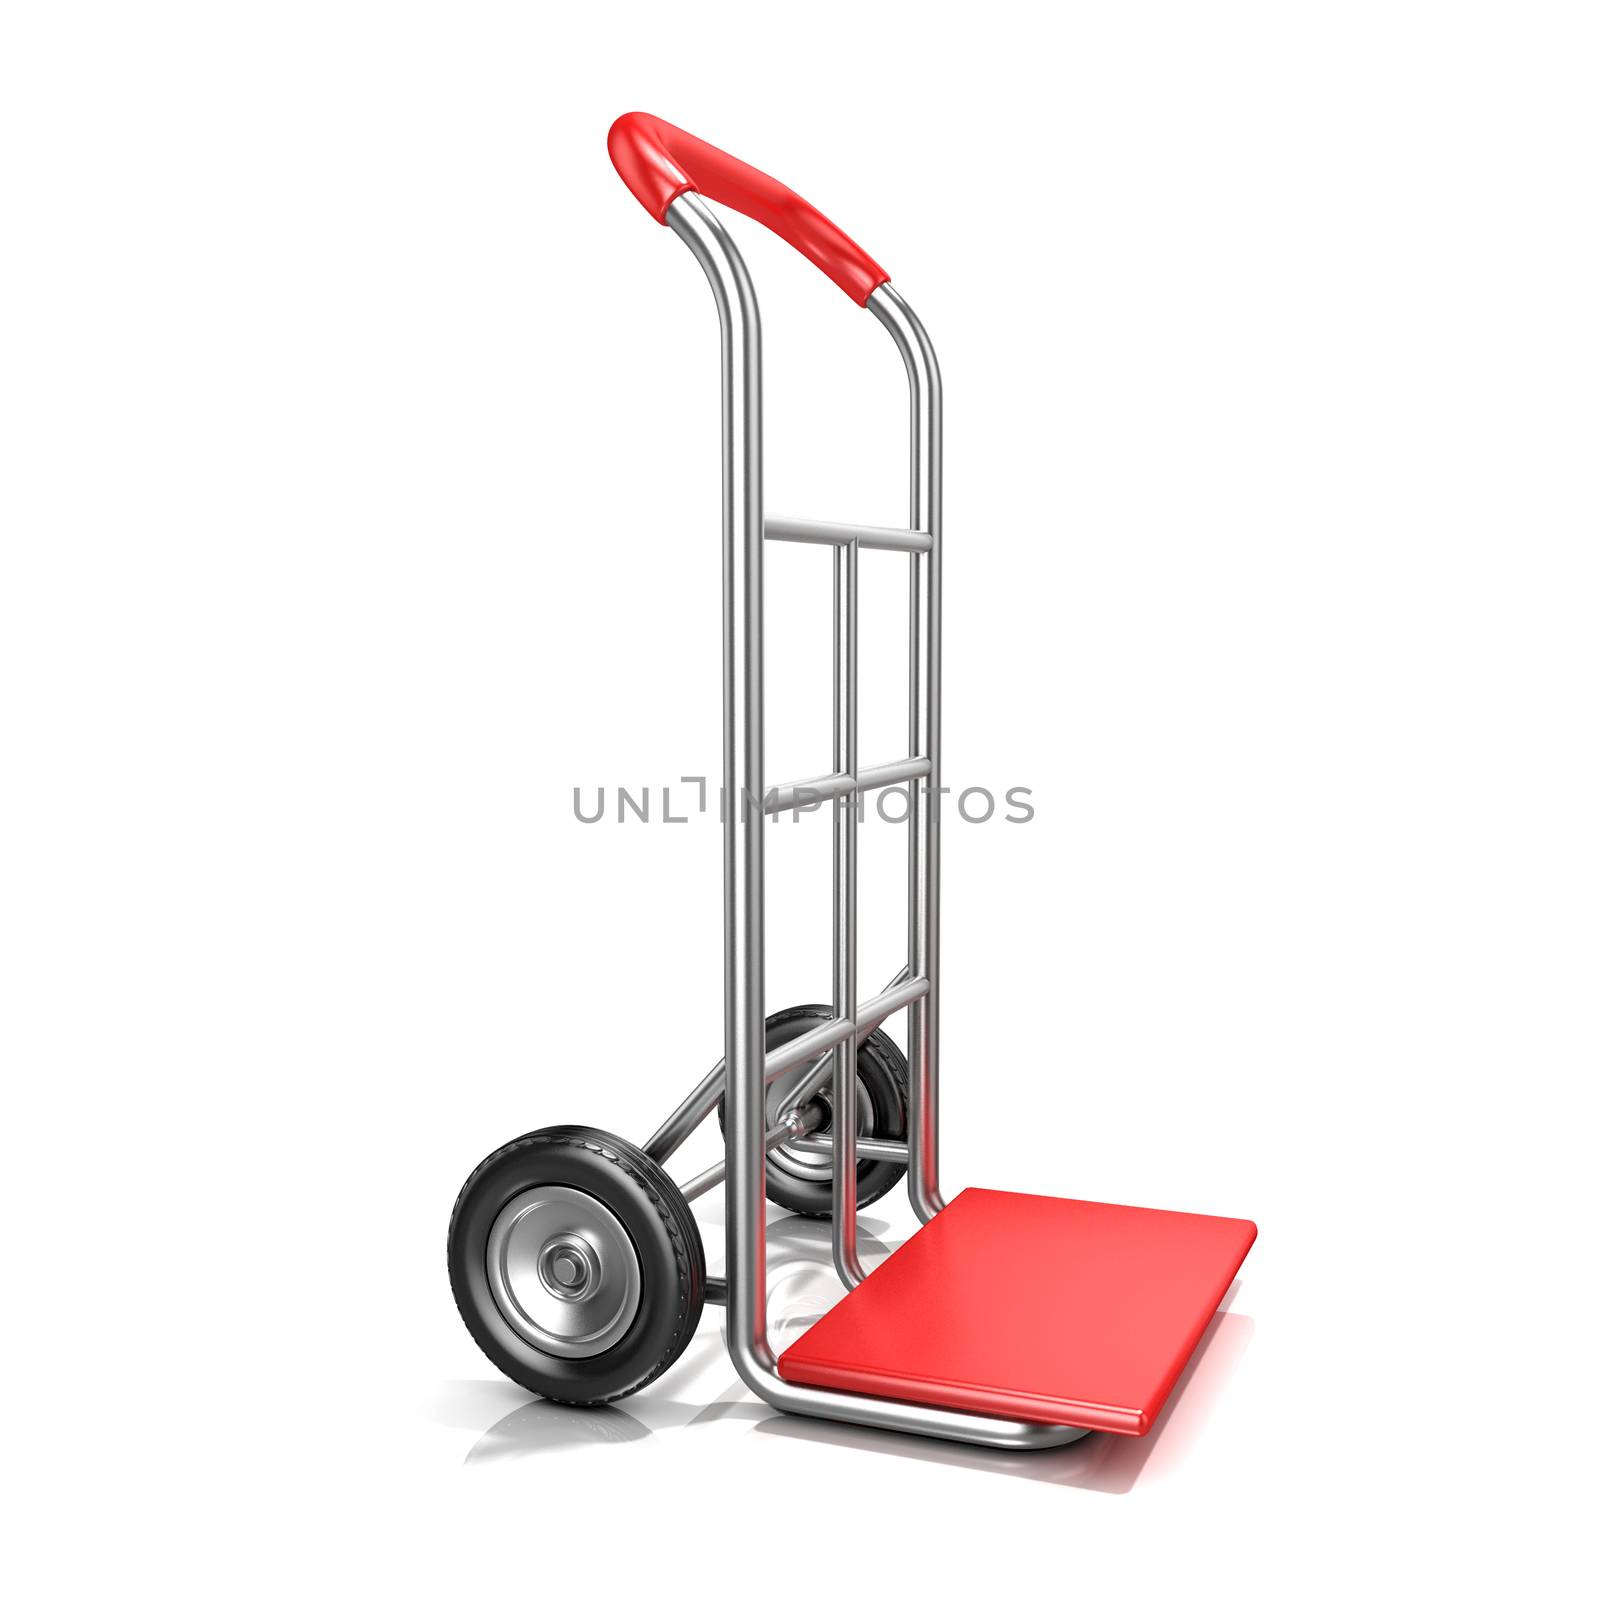 An empty hand truck, isolated on white background. 3D render illustration. Standing position, side view